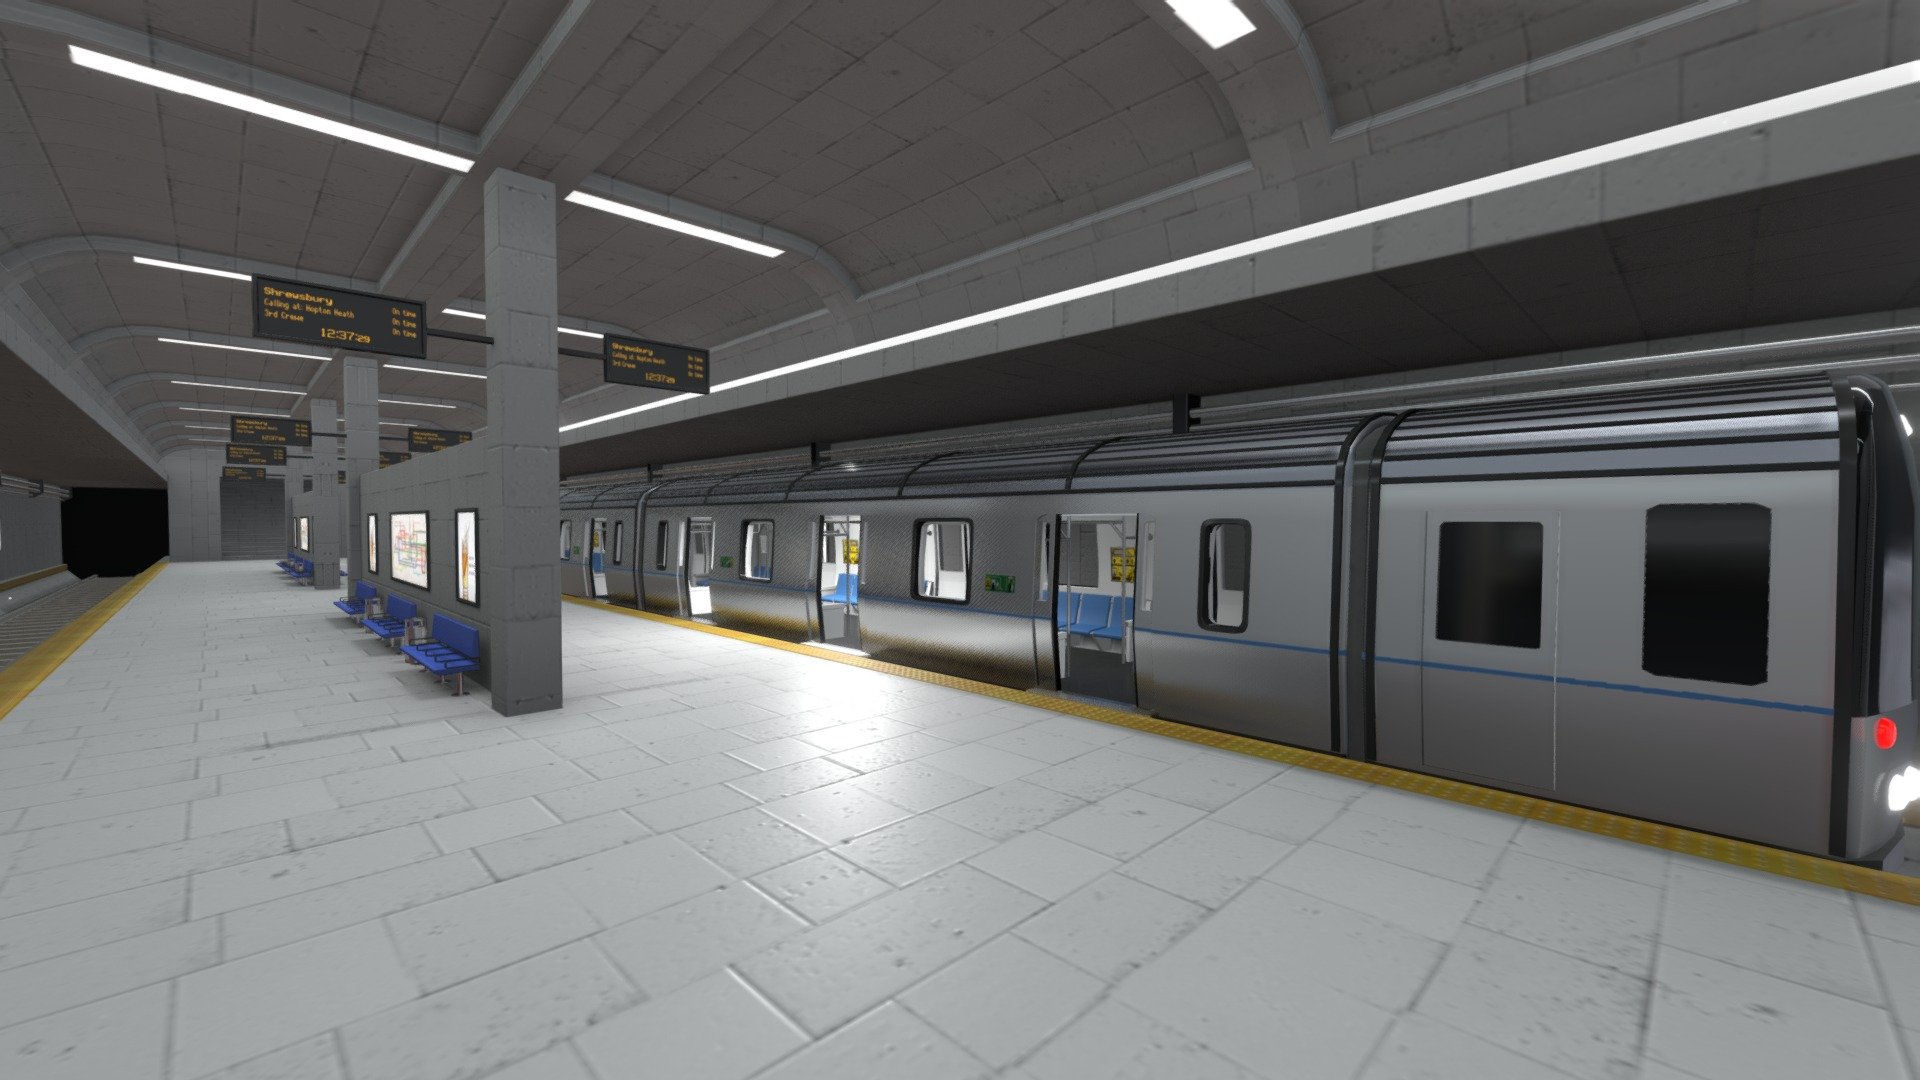 Perfect for architectural visualization, urban planning, and game design, this asset features a realistic station with platform and interior space, as well as a detailed subway train model. Its optimized for real-time rendering and can be easily integrated into a variety of software applications 3d model